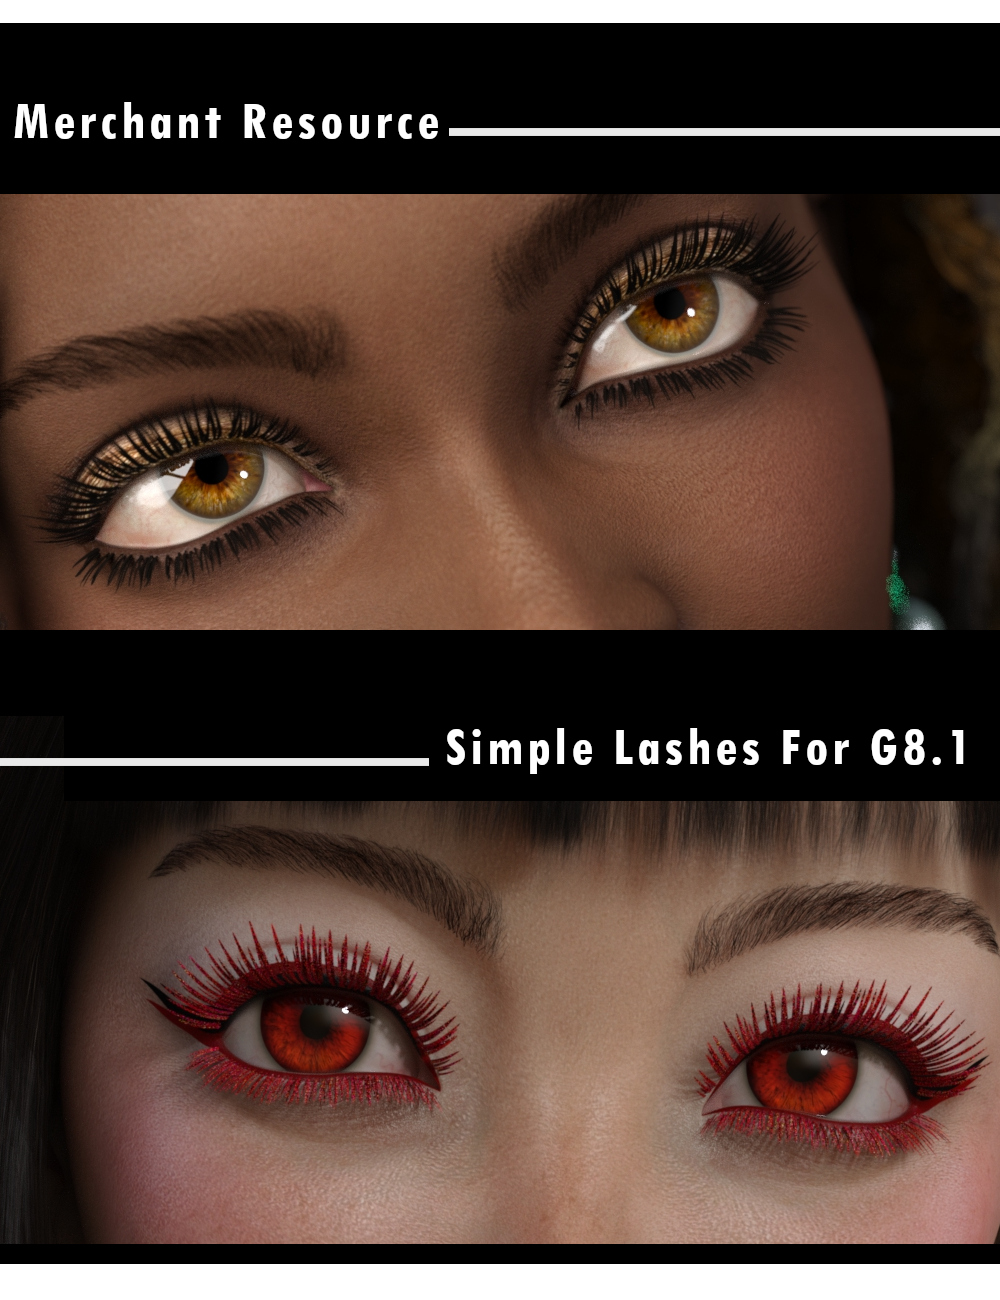 Simple Lashes Merchant Resource for Genesis 8.1 by: DisparateDreamer, 3D Models by Daz 3D